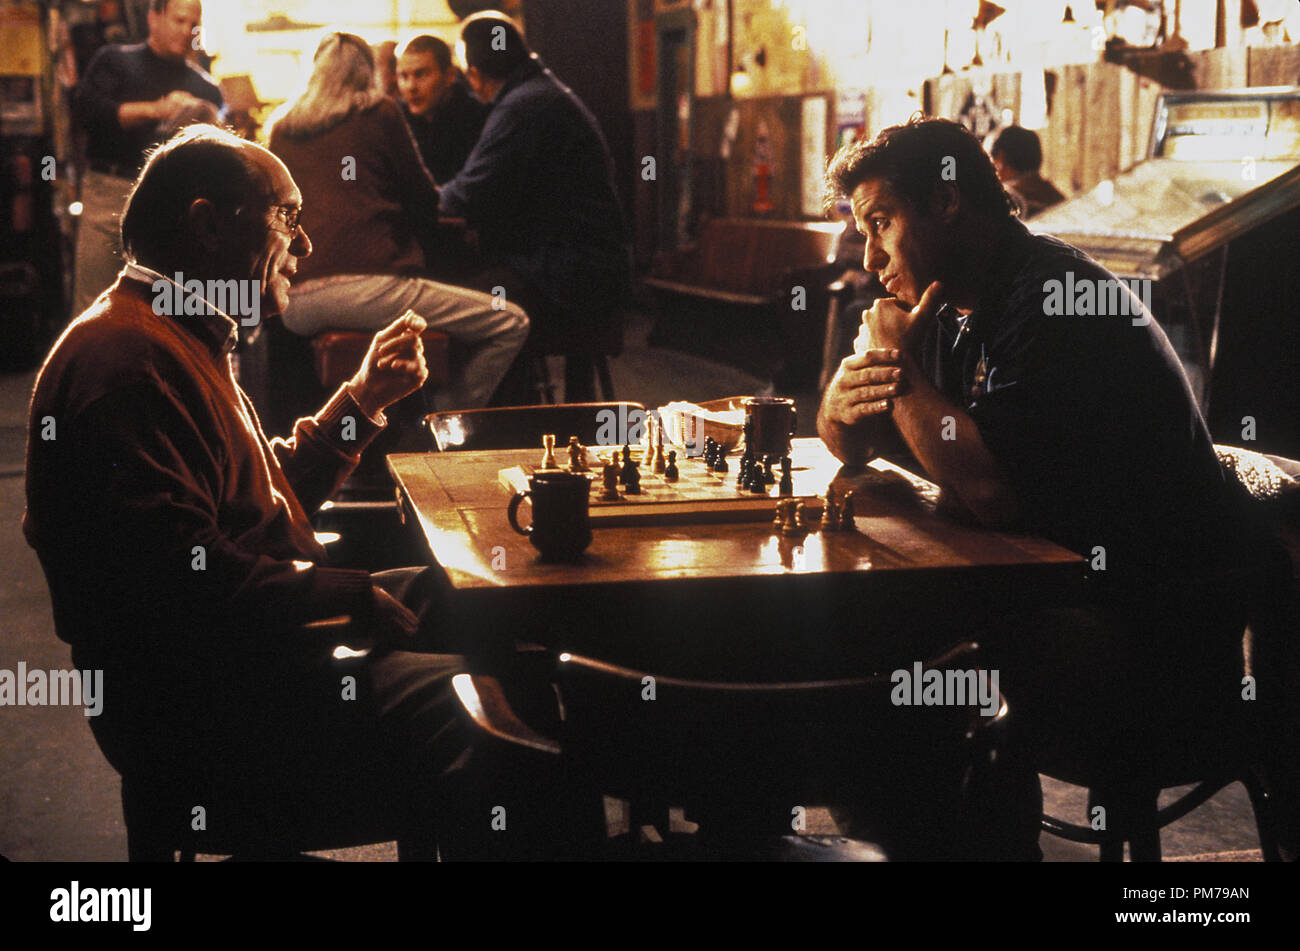 Film Still from 'Phenomenon' Robert Duvall, John Travolta © 1996 Touchstone Pictures Photo Credit: Zade Rosenthal  File Reference # 31042298THA  For Editorial Use Only - All Rights Reserved Stock Photo